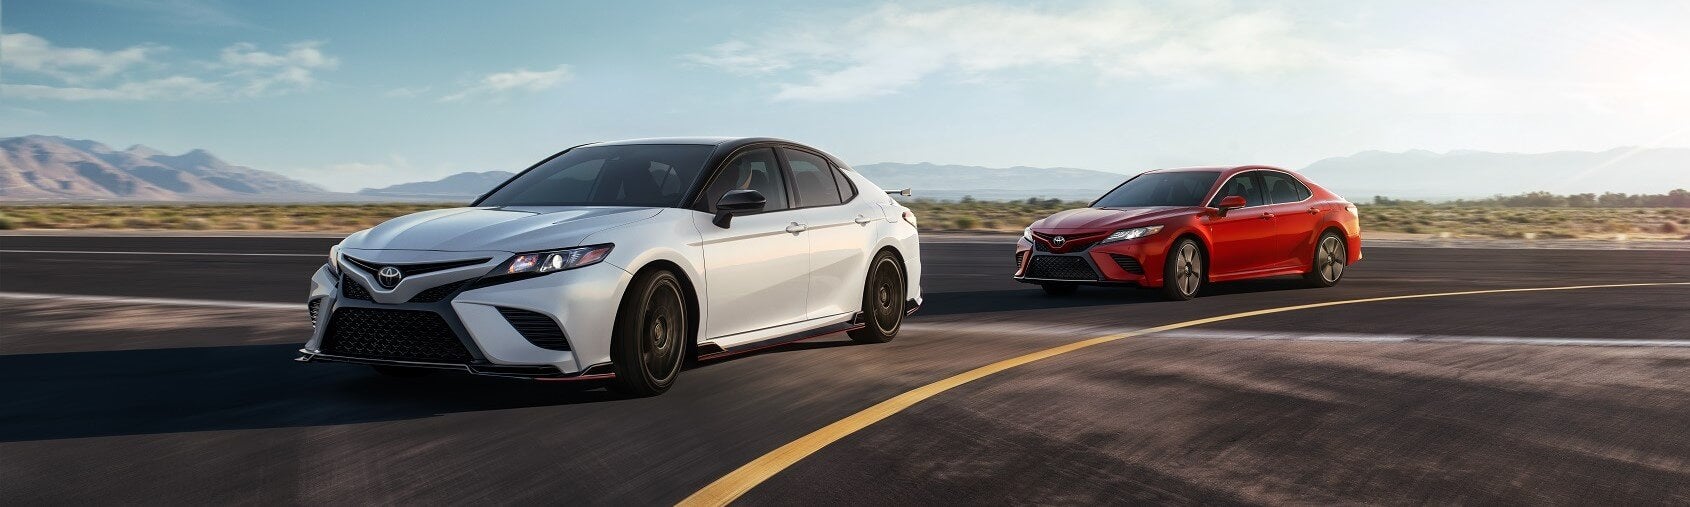 2020 Camry Review